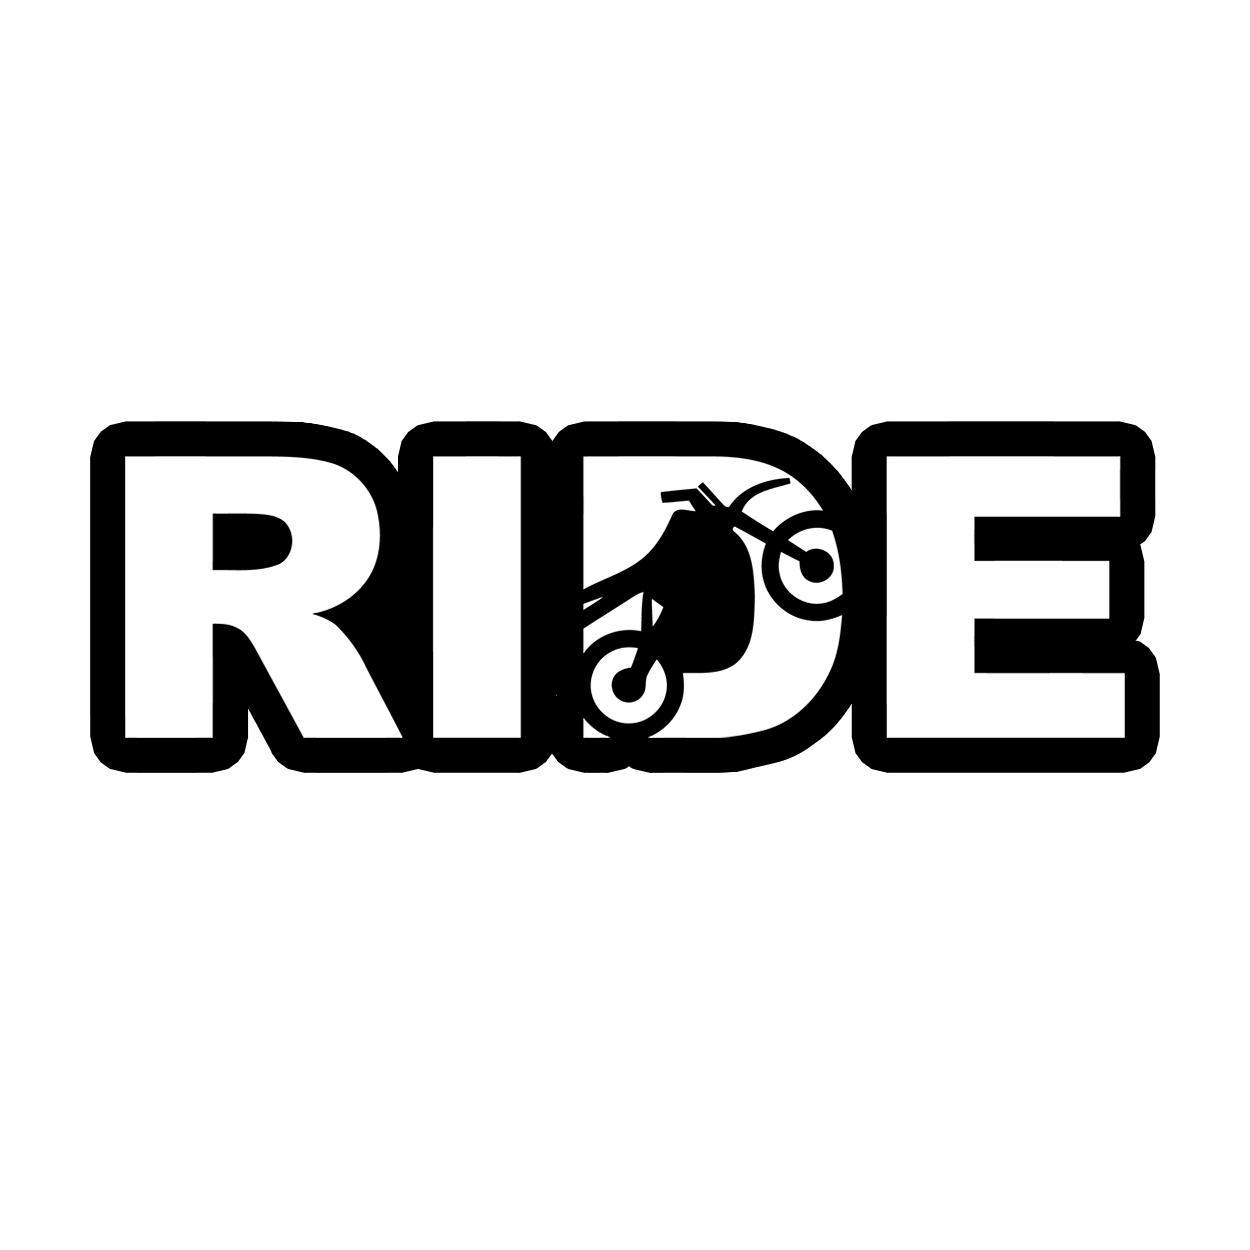 Ride Moto Logo Classic Sticker (White Logo) FREE Promotional Giveaway from RideBrand.com Event Thank You!